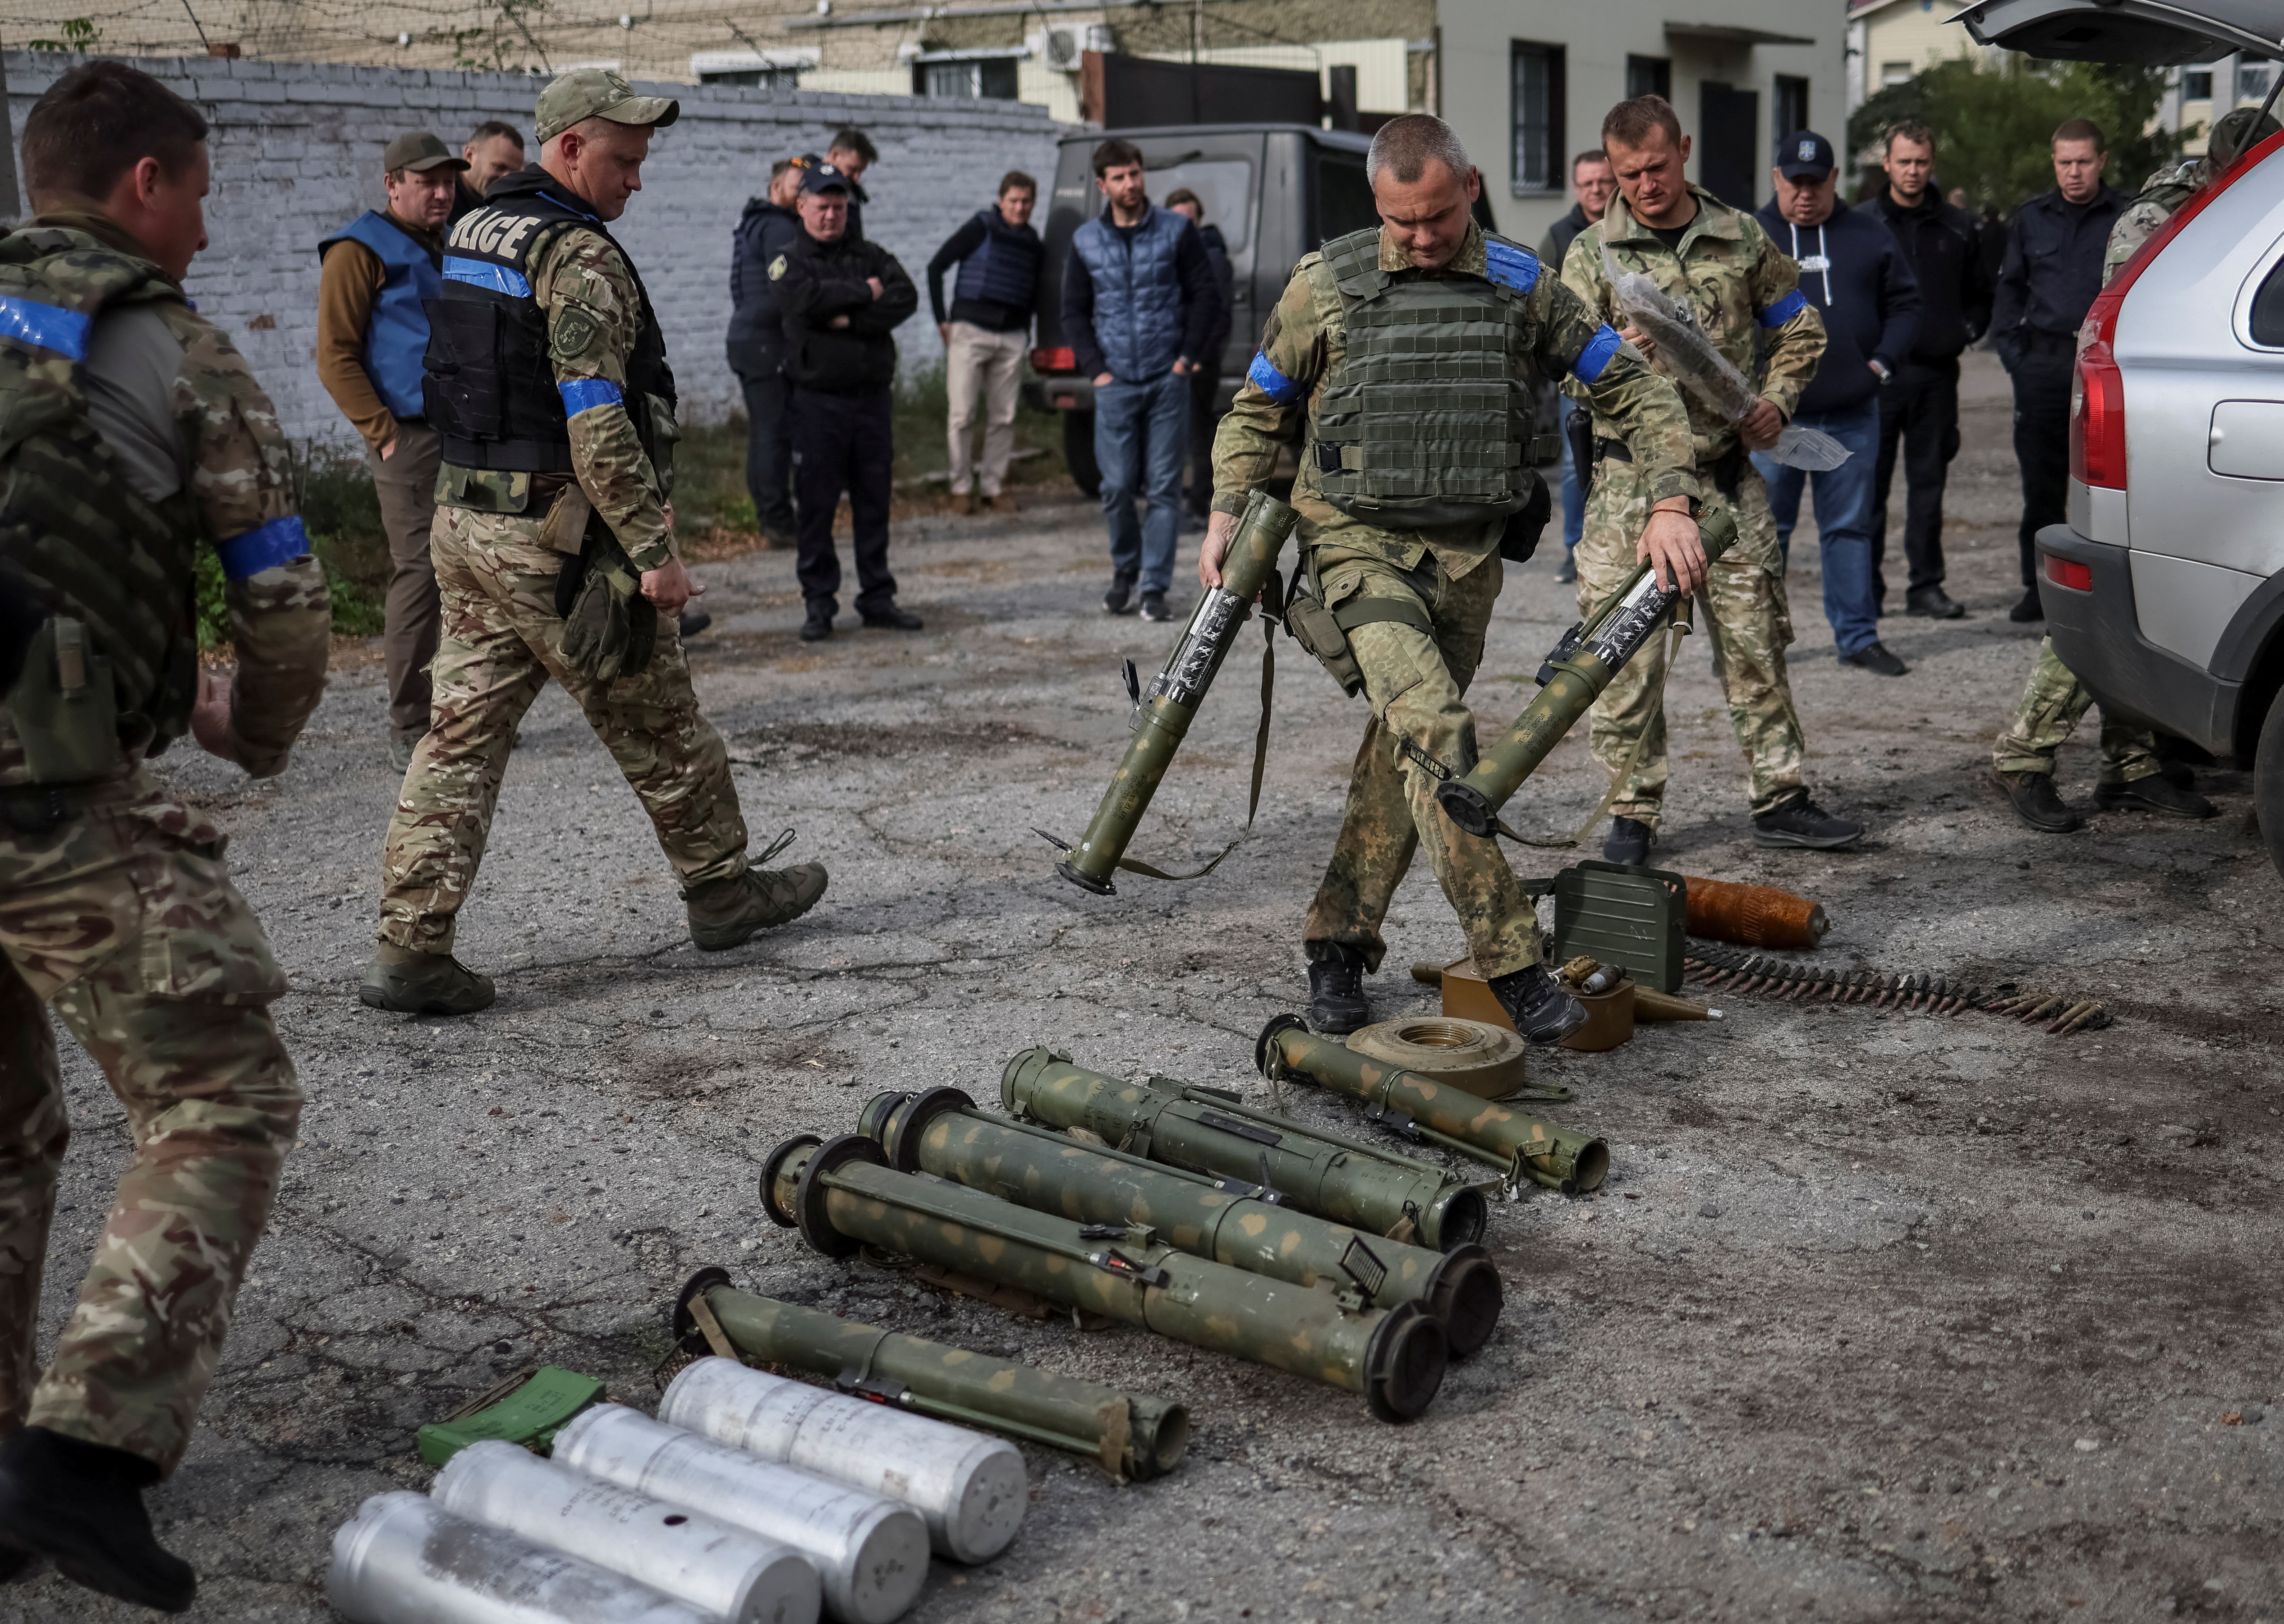 A police sapper sorts unexploded mine shells and weapons after return from the village of Udy, recently liberated by Ukrainian Armed Forces, in the town of Zolochiv